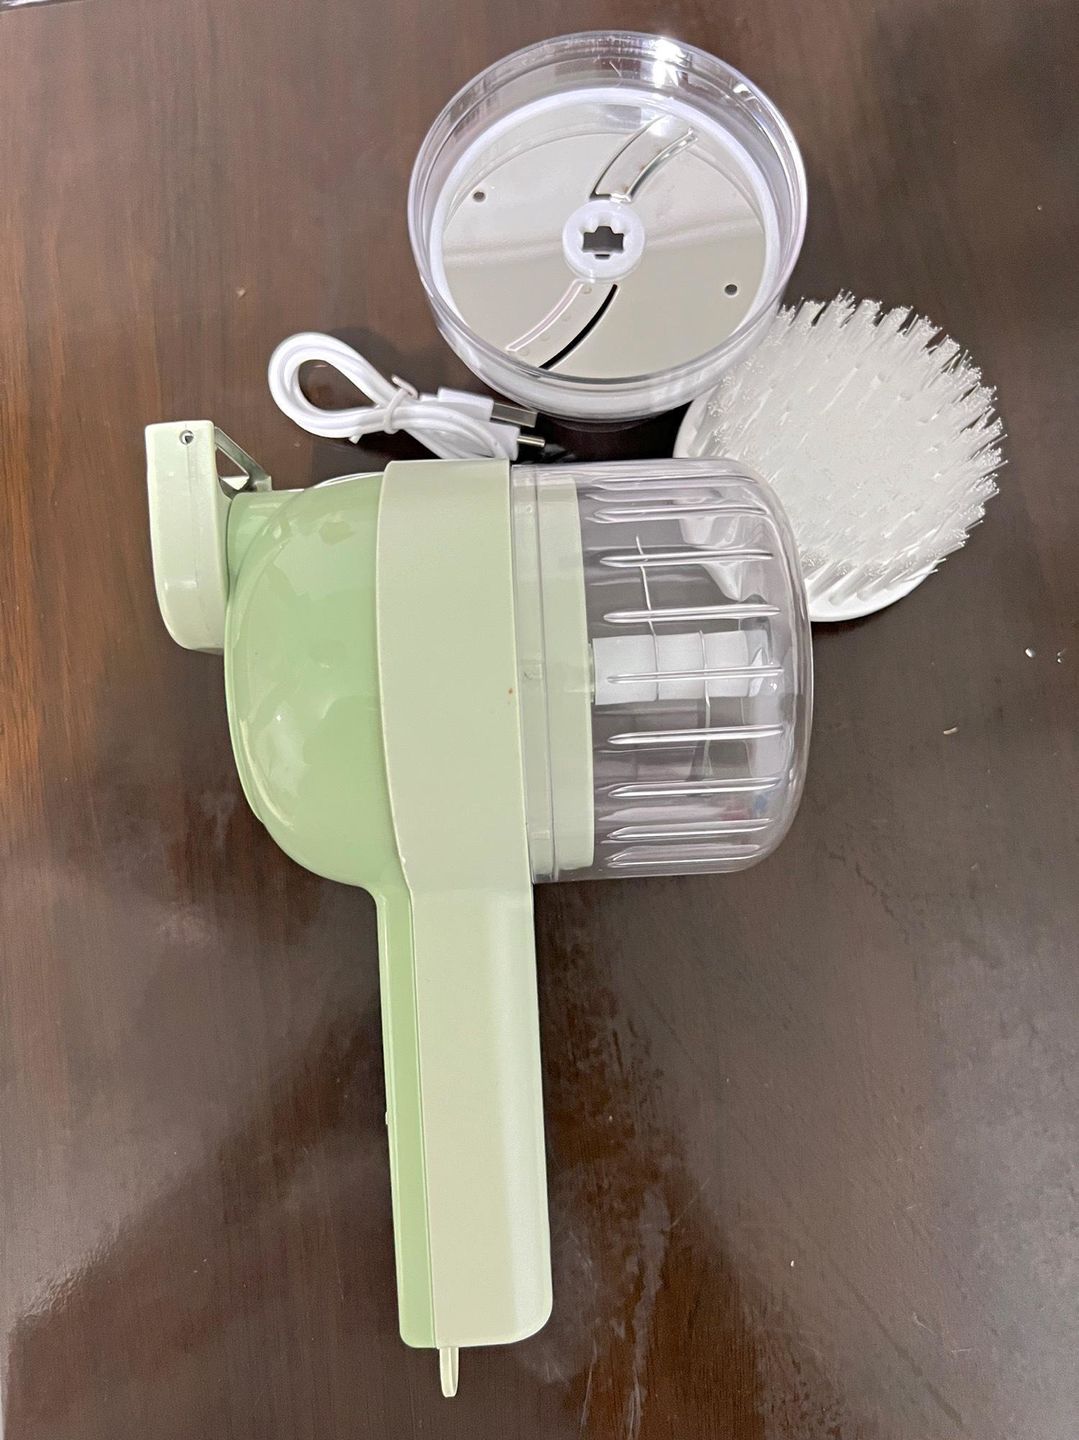 4 In 1 Multifunctional Electric Vegetable Cutter photo review